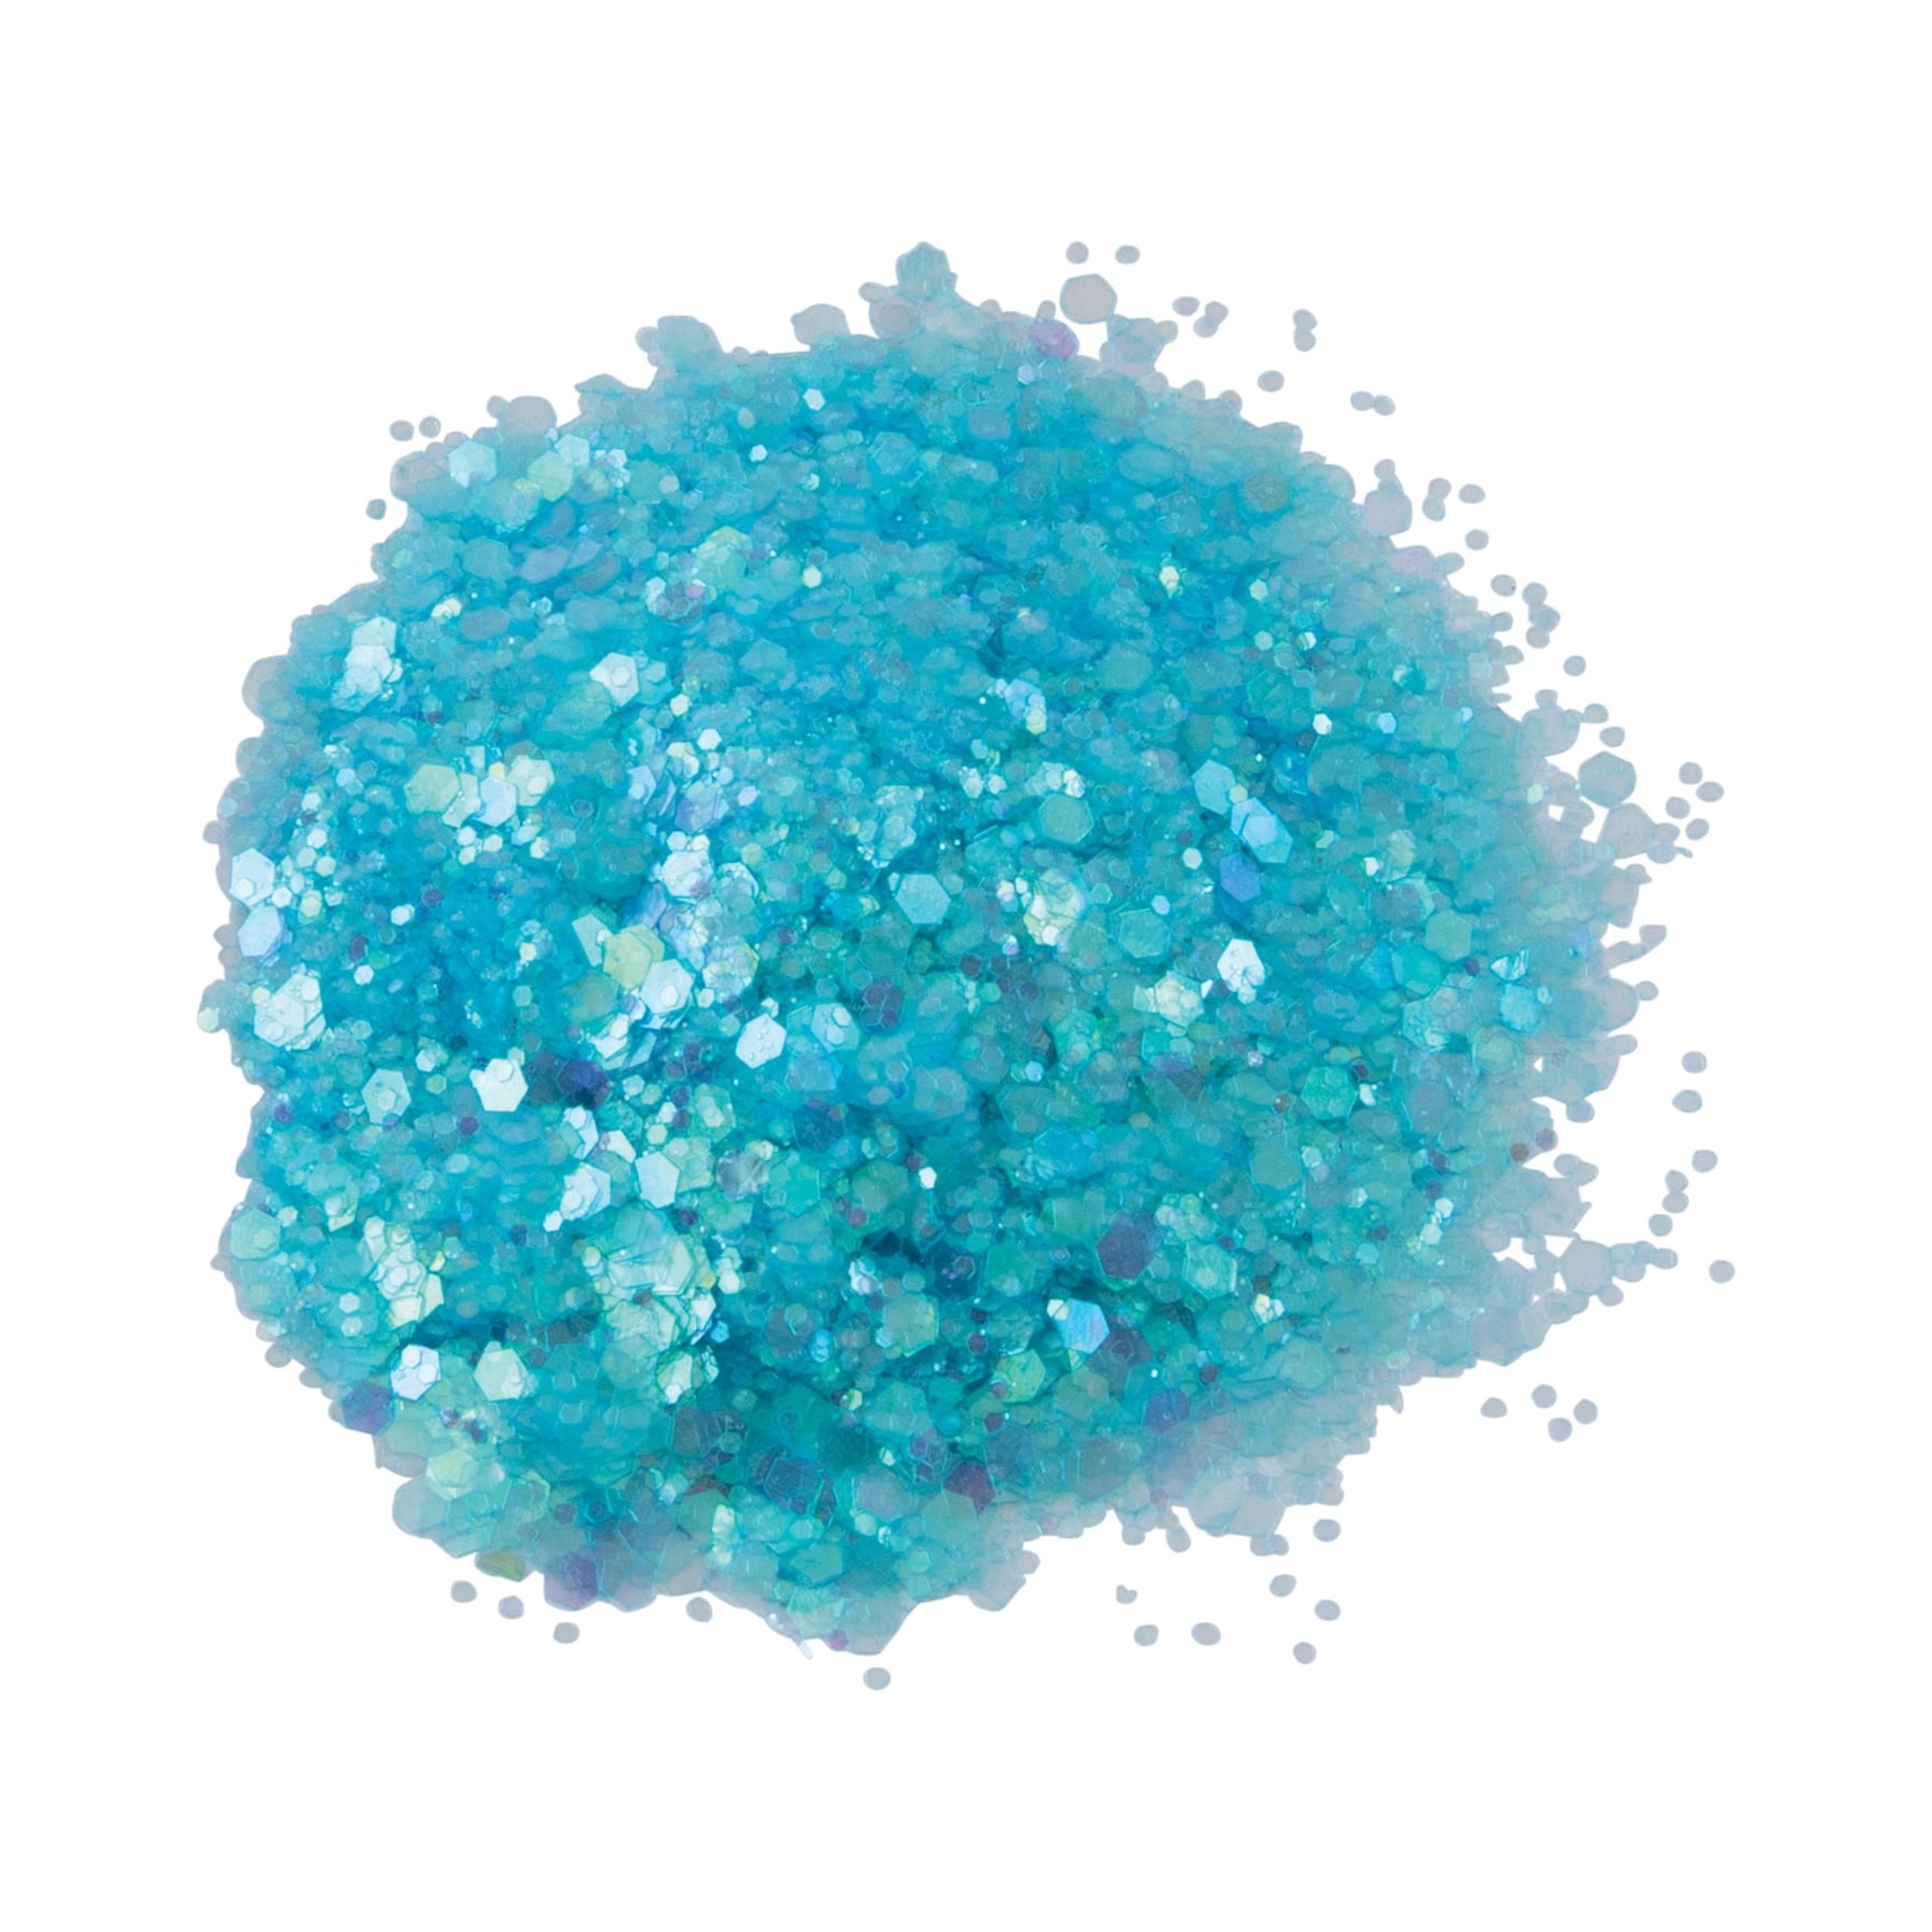 Sulyn Party Surprise Glitter Snow 2.5 oz Non-toxic for sale online